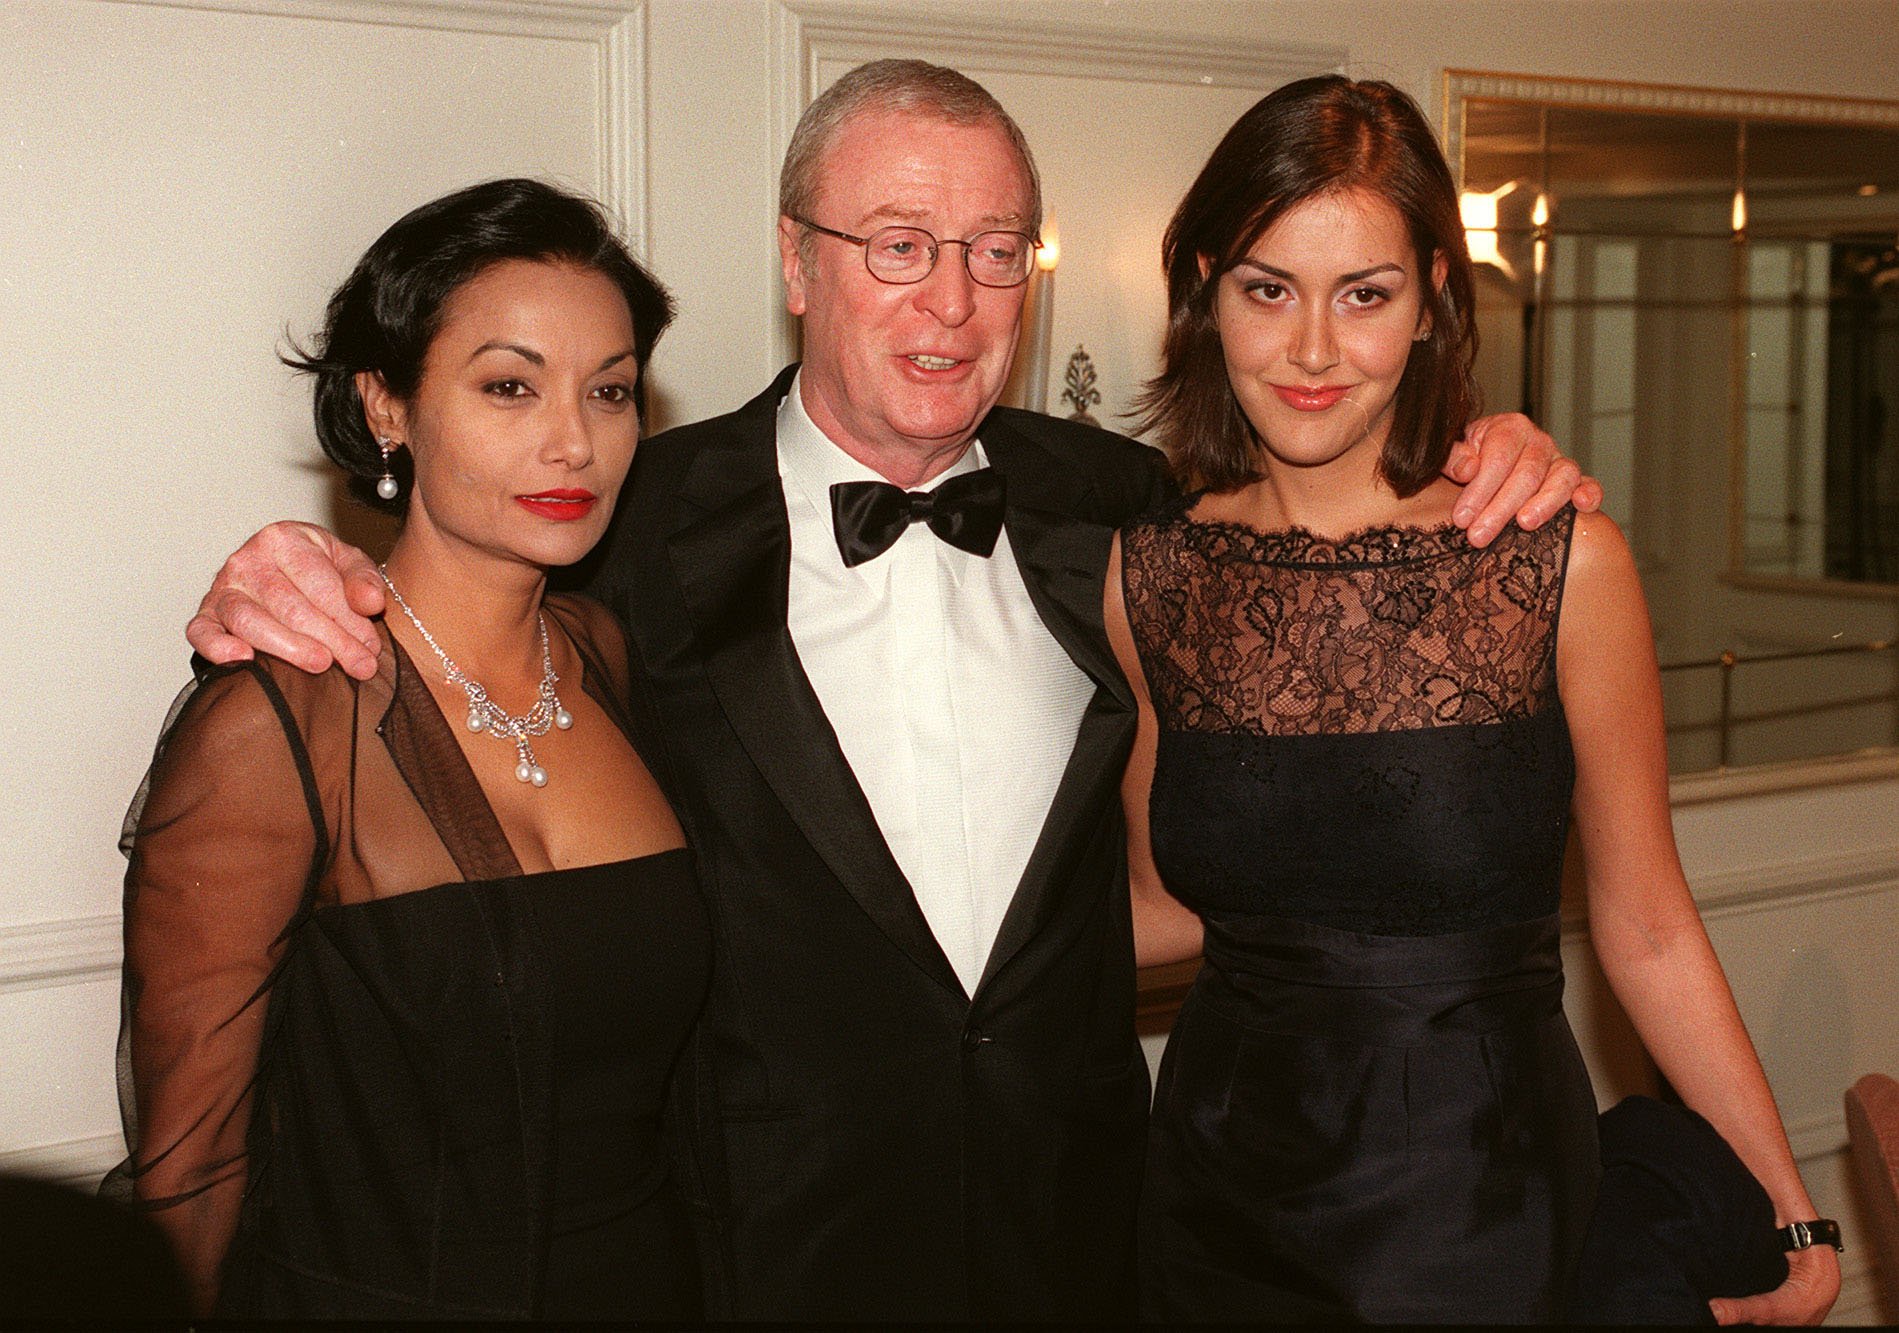 Michael Caine with wife Shakira Caine and daughter Natasha during the Evening Standard British Film Awards at the Savoy Hotel in 1998, London. / Source: Getty Images